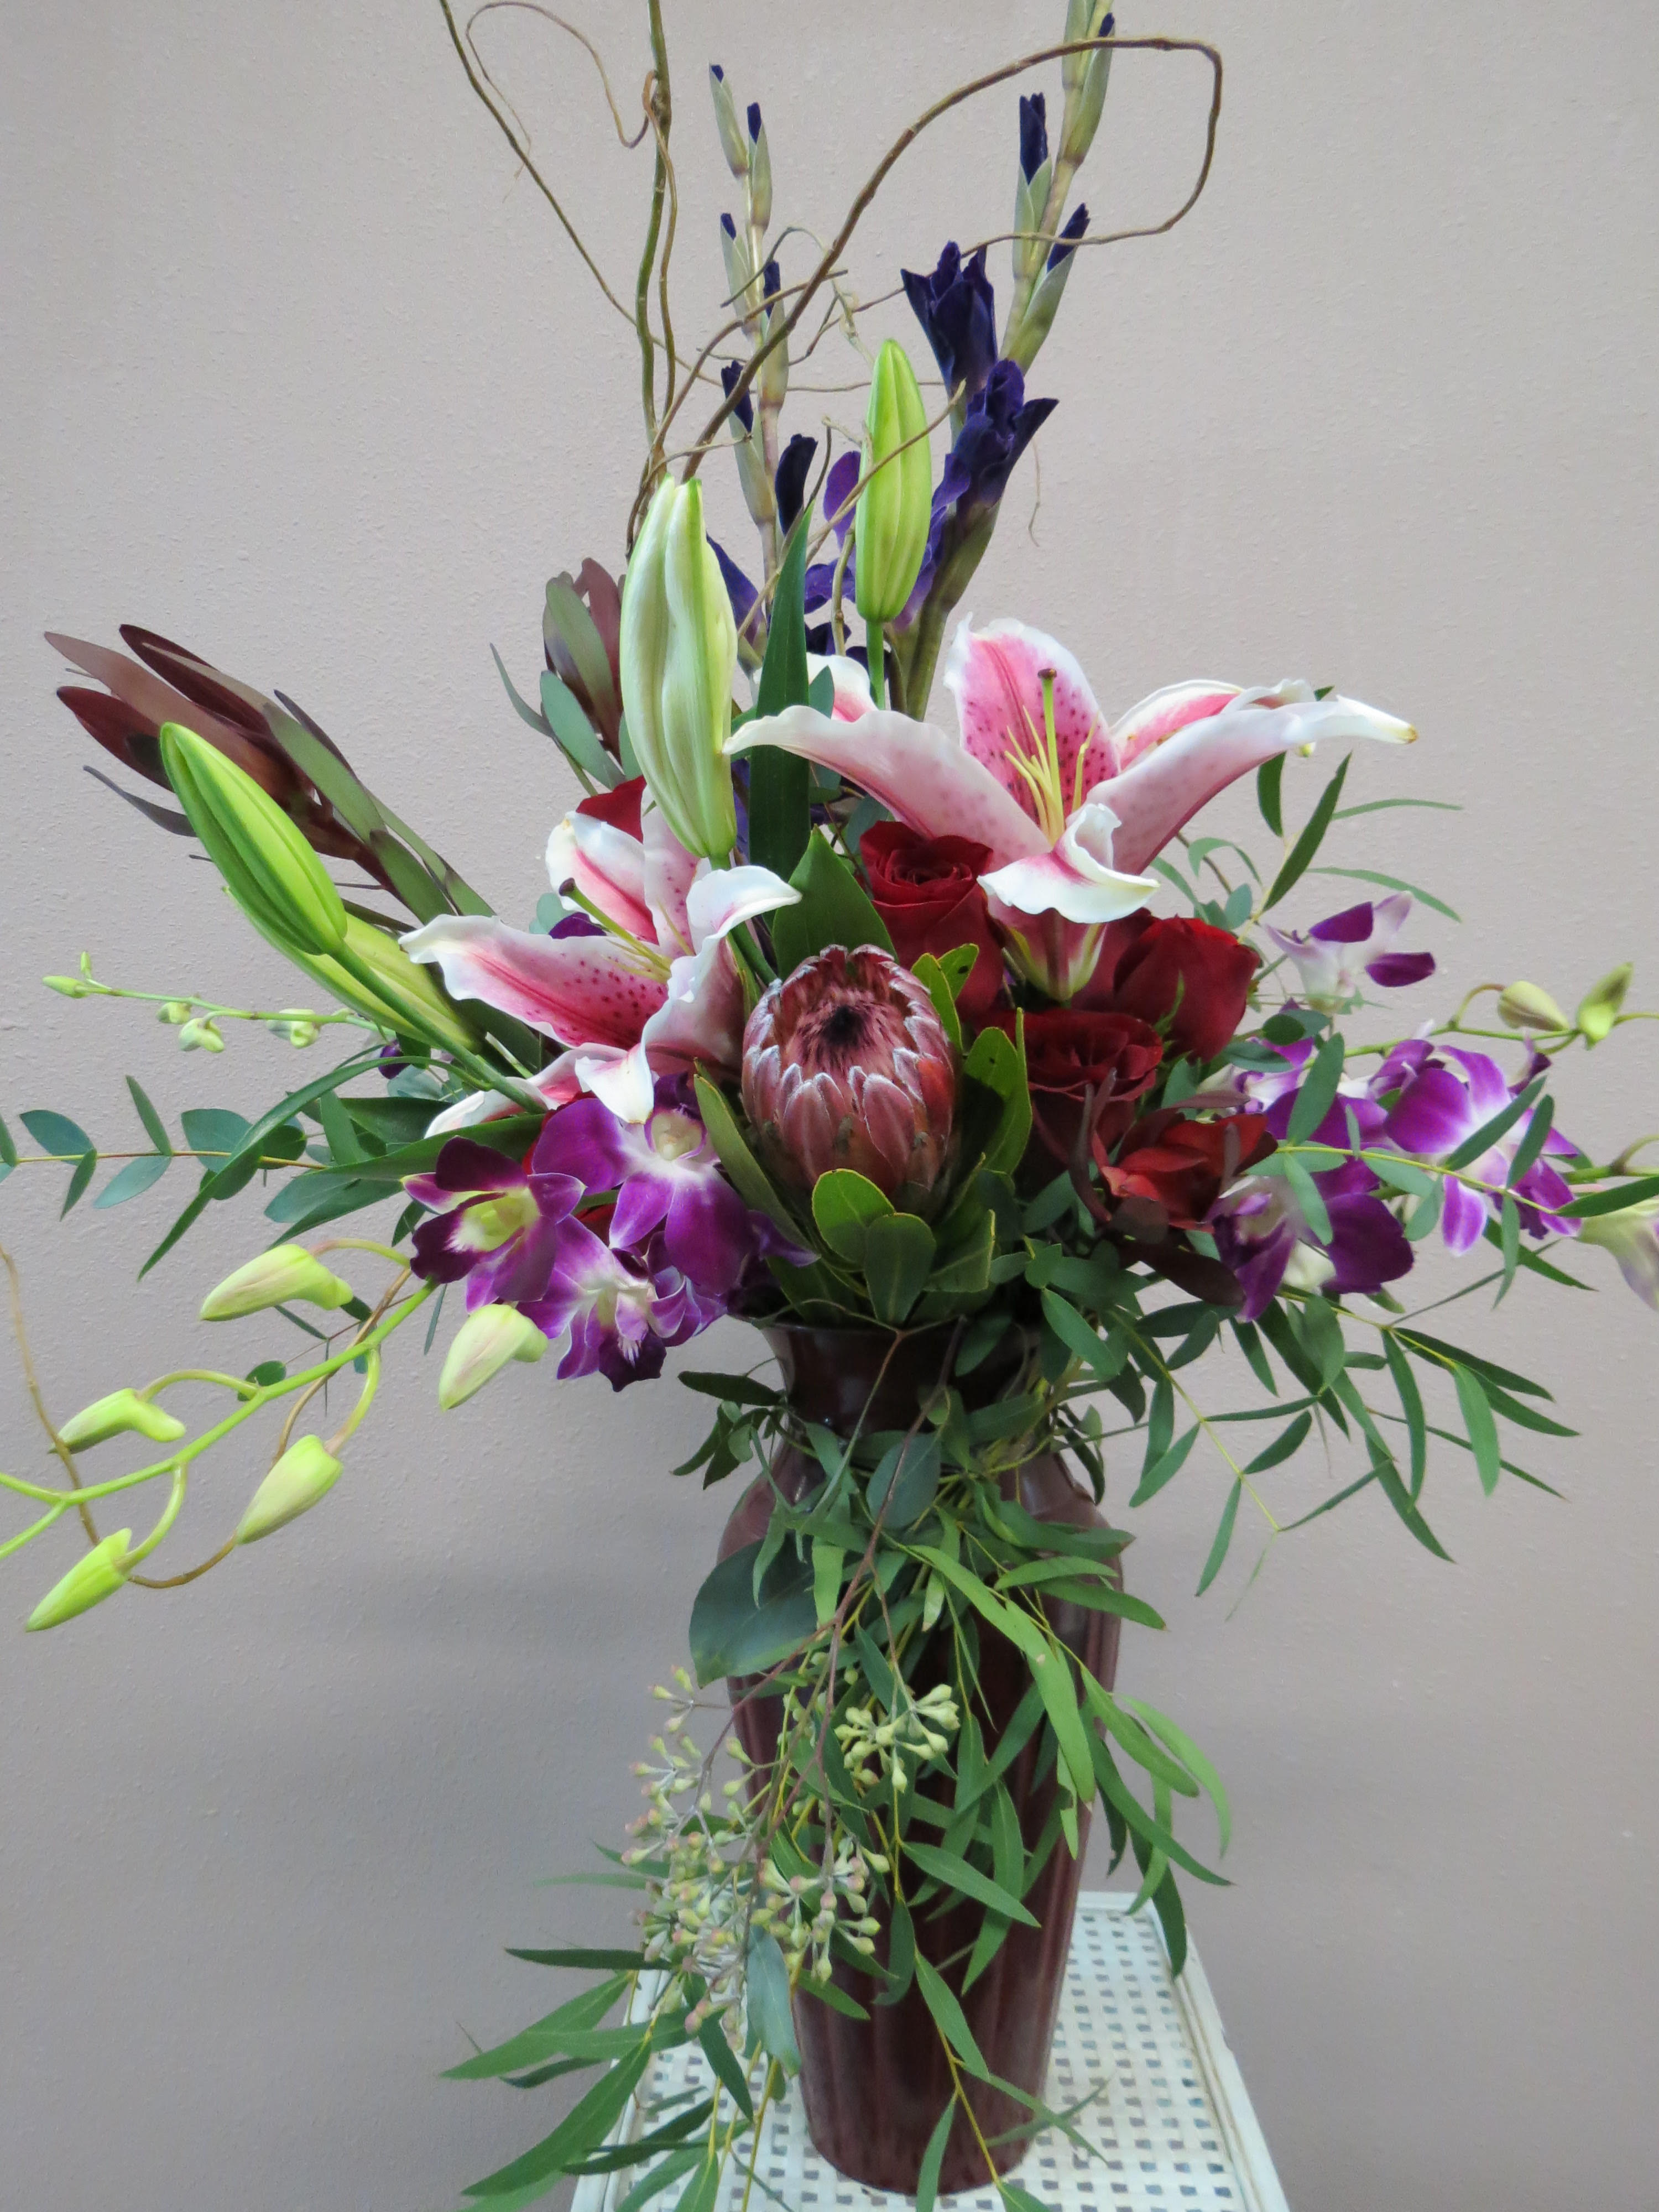 High Style Bouquet - Contains flowers such as orchid, protea, gladiolas, eucalyptus, stargazer lilies, and assorted greenery. 